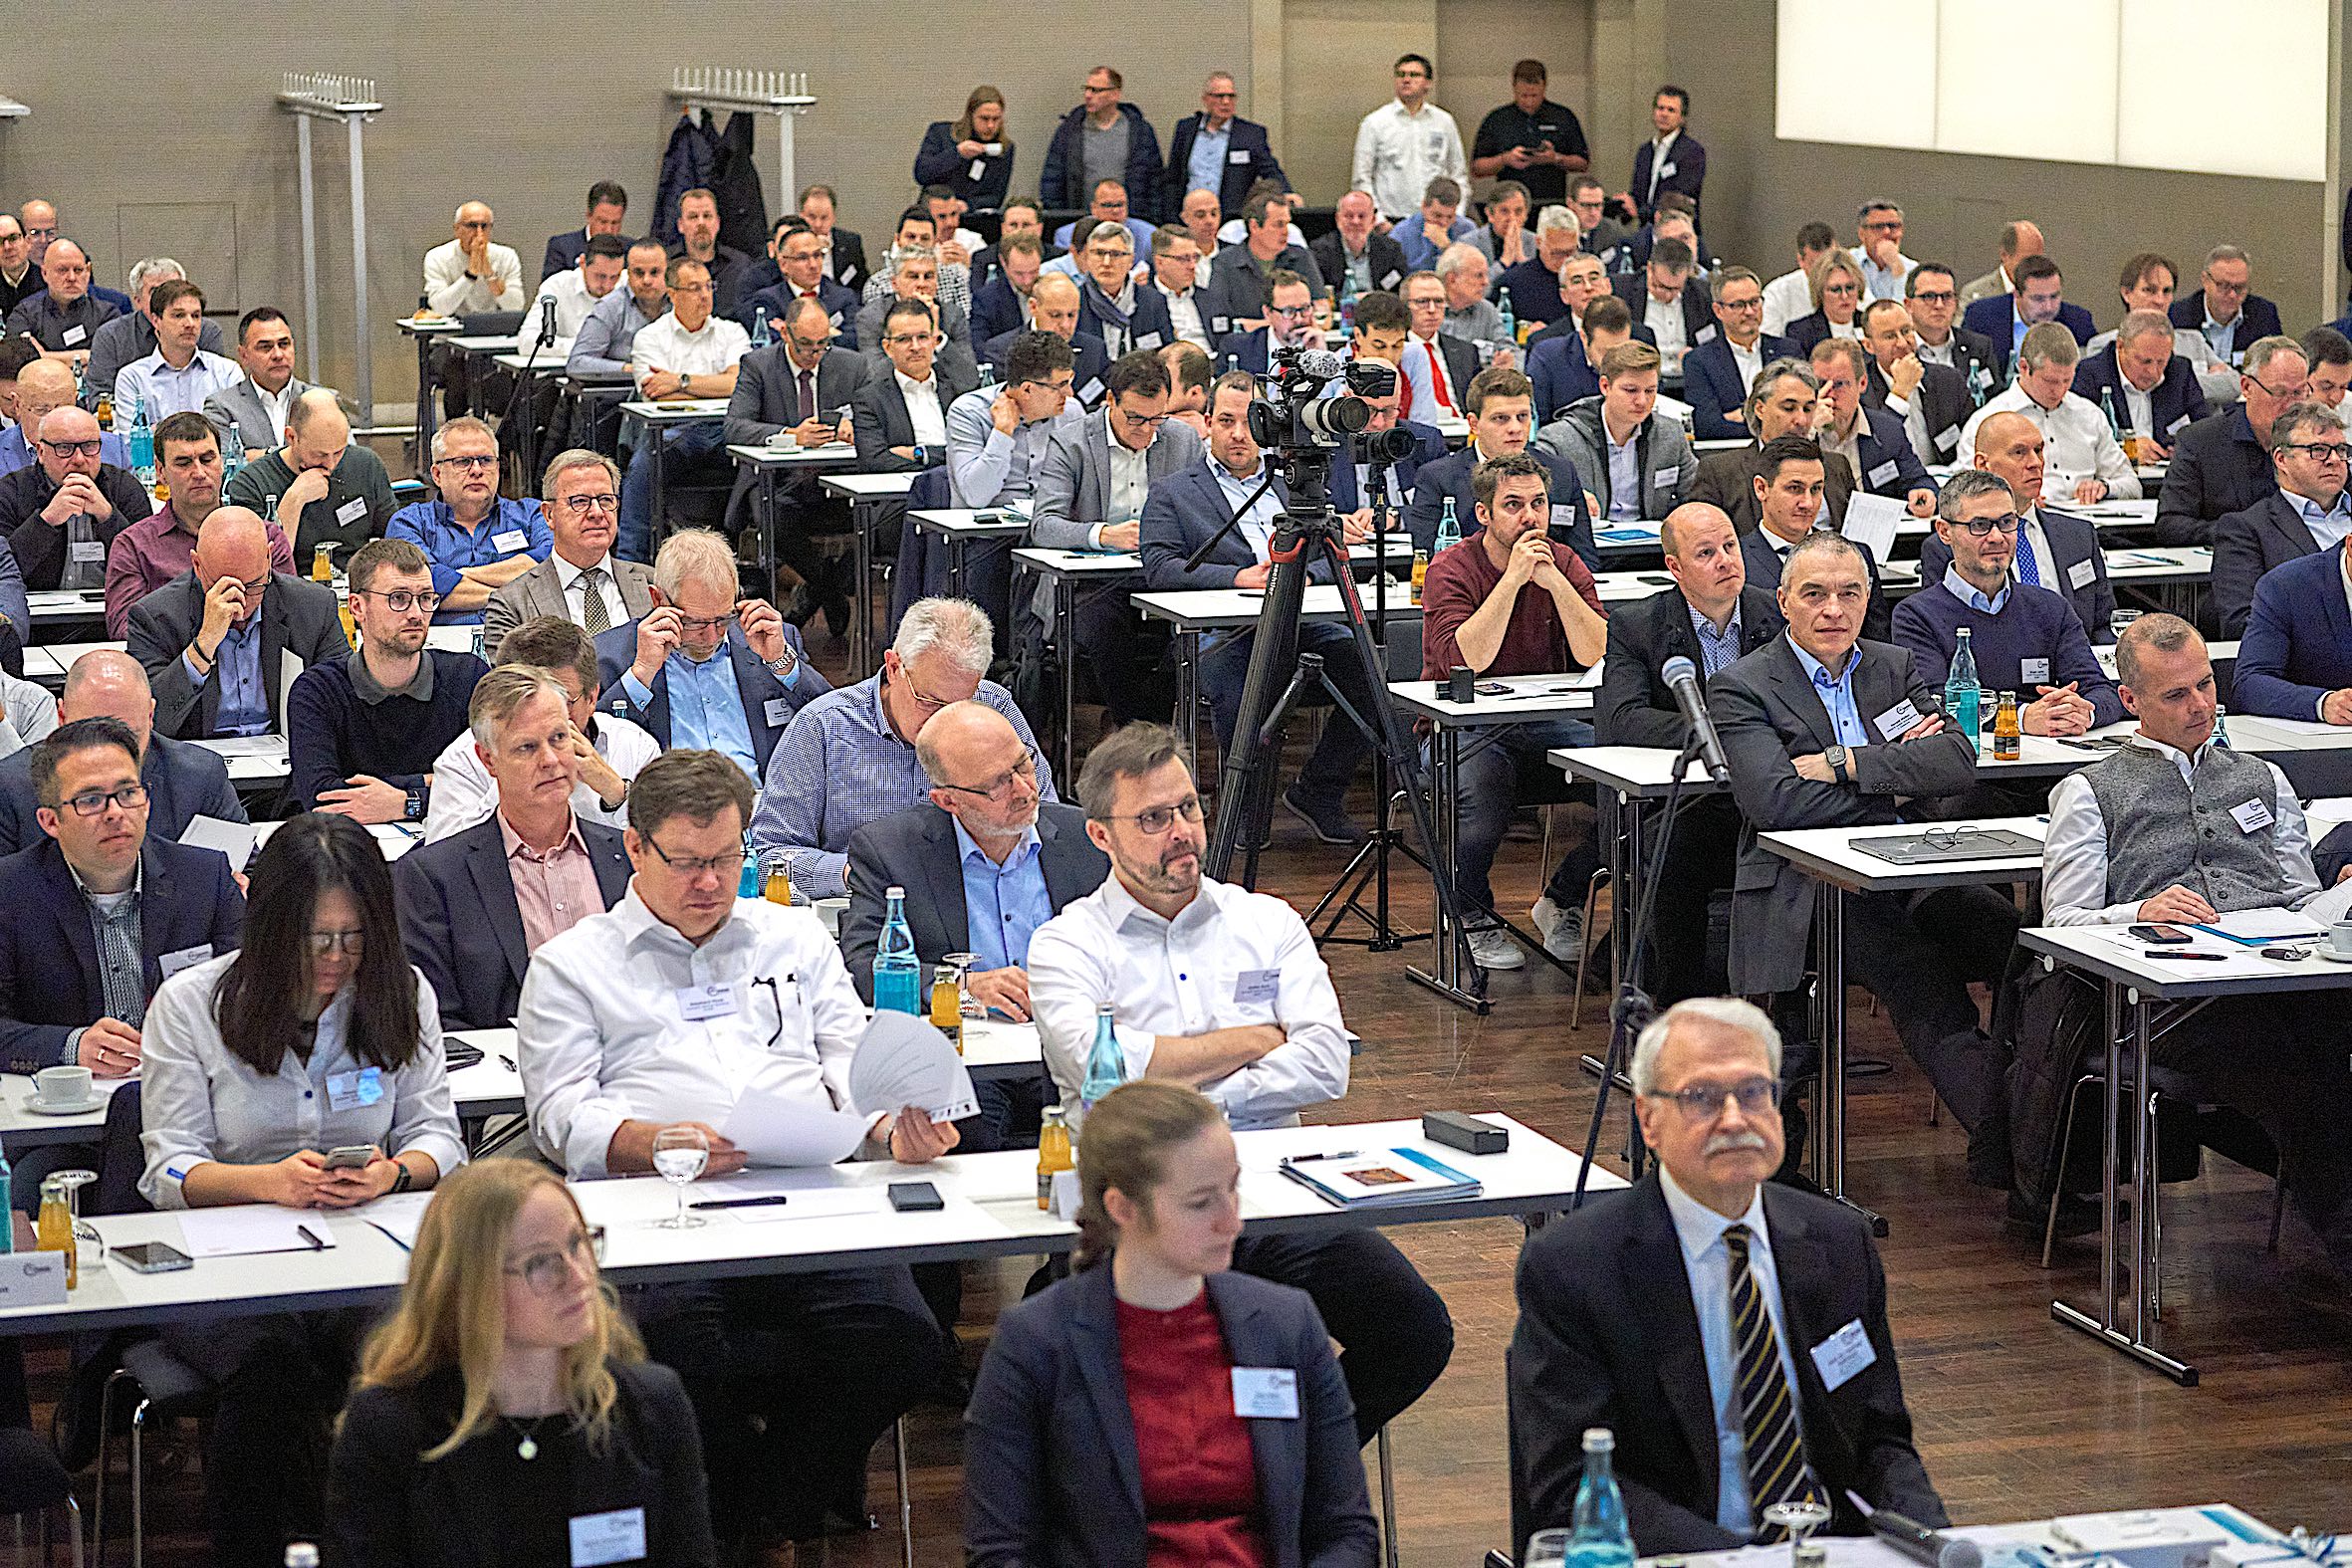 Around 250 domestic and foreign participants from production, development, design, research and teaching attended the intensive and lively industry meeting in the Westfalenhallen congress center. In the front, Professsor Dr. Hartnut Hoffmann, predecessor of Professor Dr. Wolfram Volk at TUM and former editor of bbr. © KIST